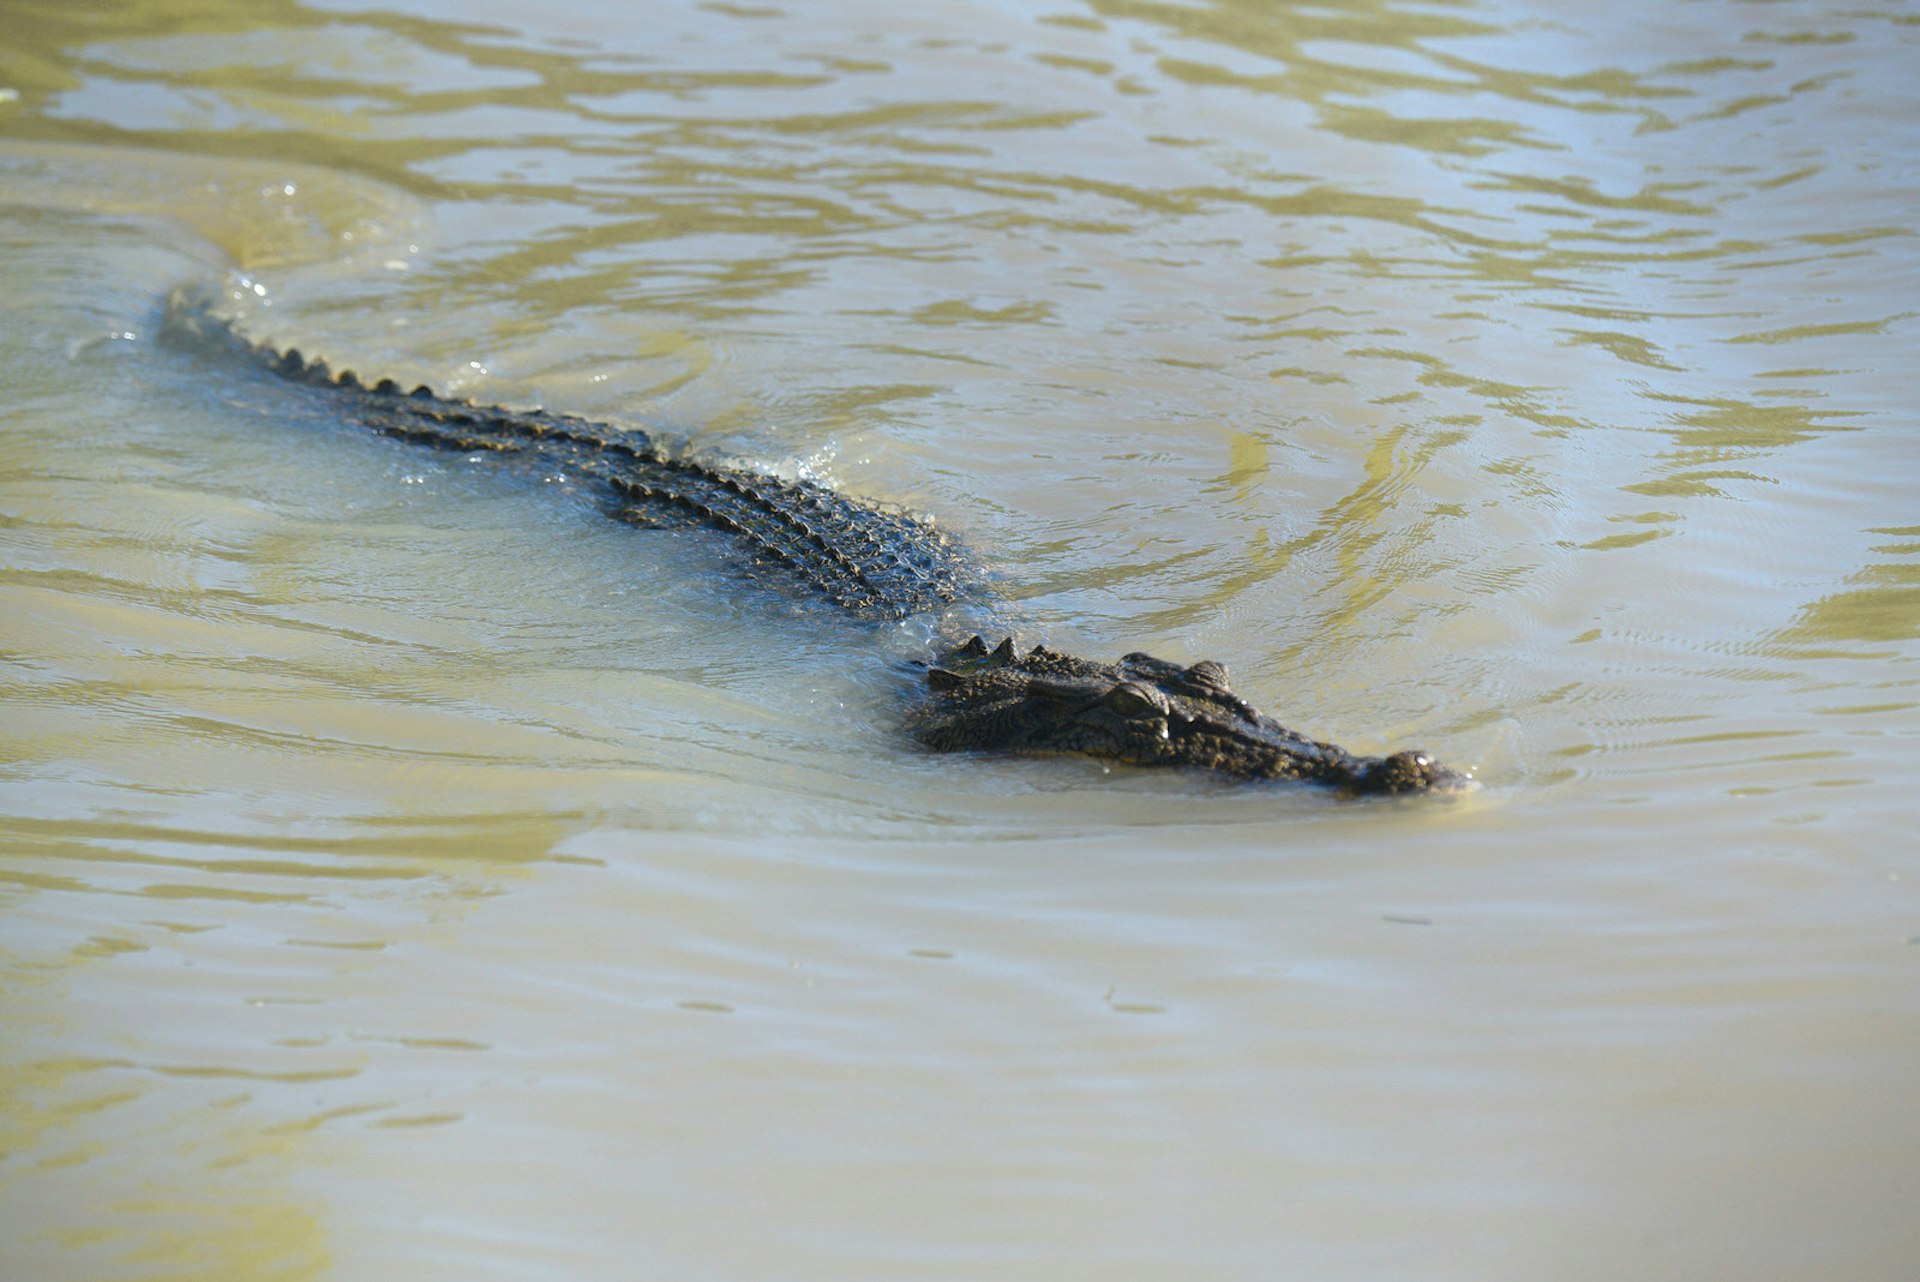 saltwater (or saltie) crocodile swimming in the Adelaide River 